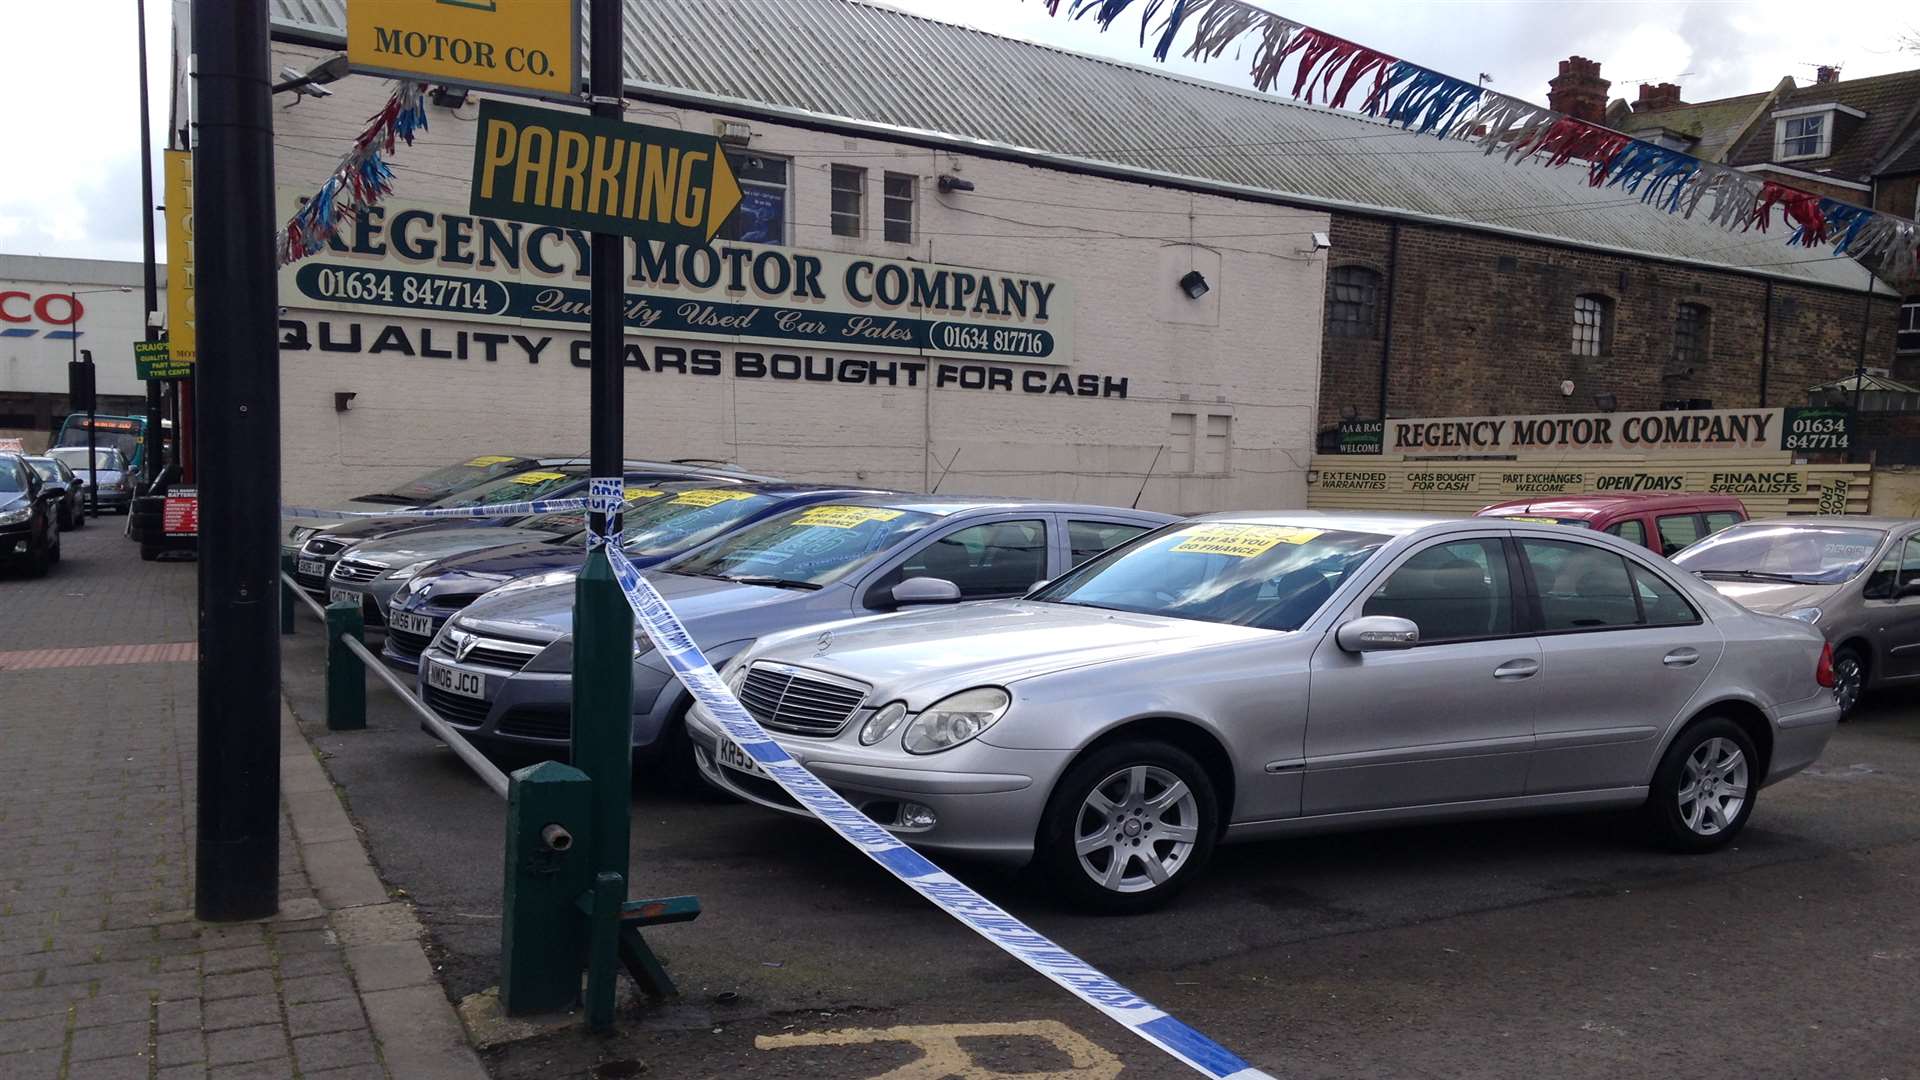 The Regency Motor Company forecourt in The Brook, Chatham, was targeted